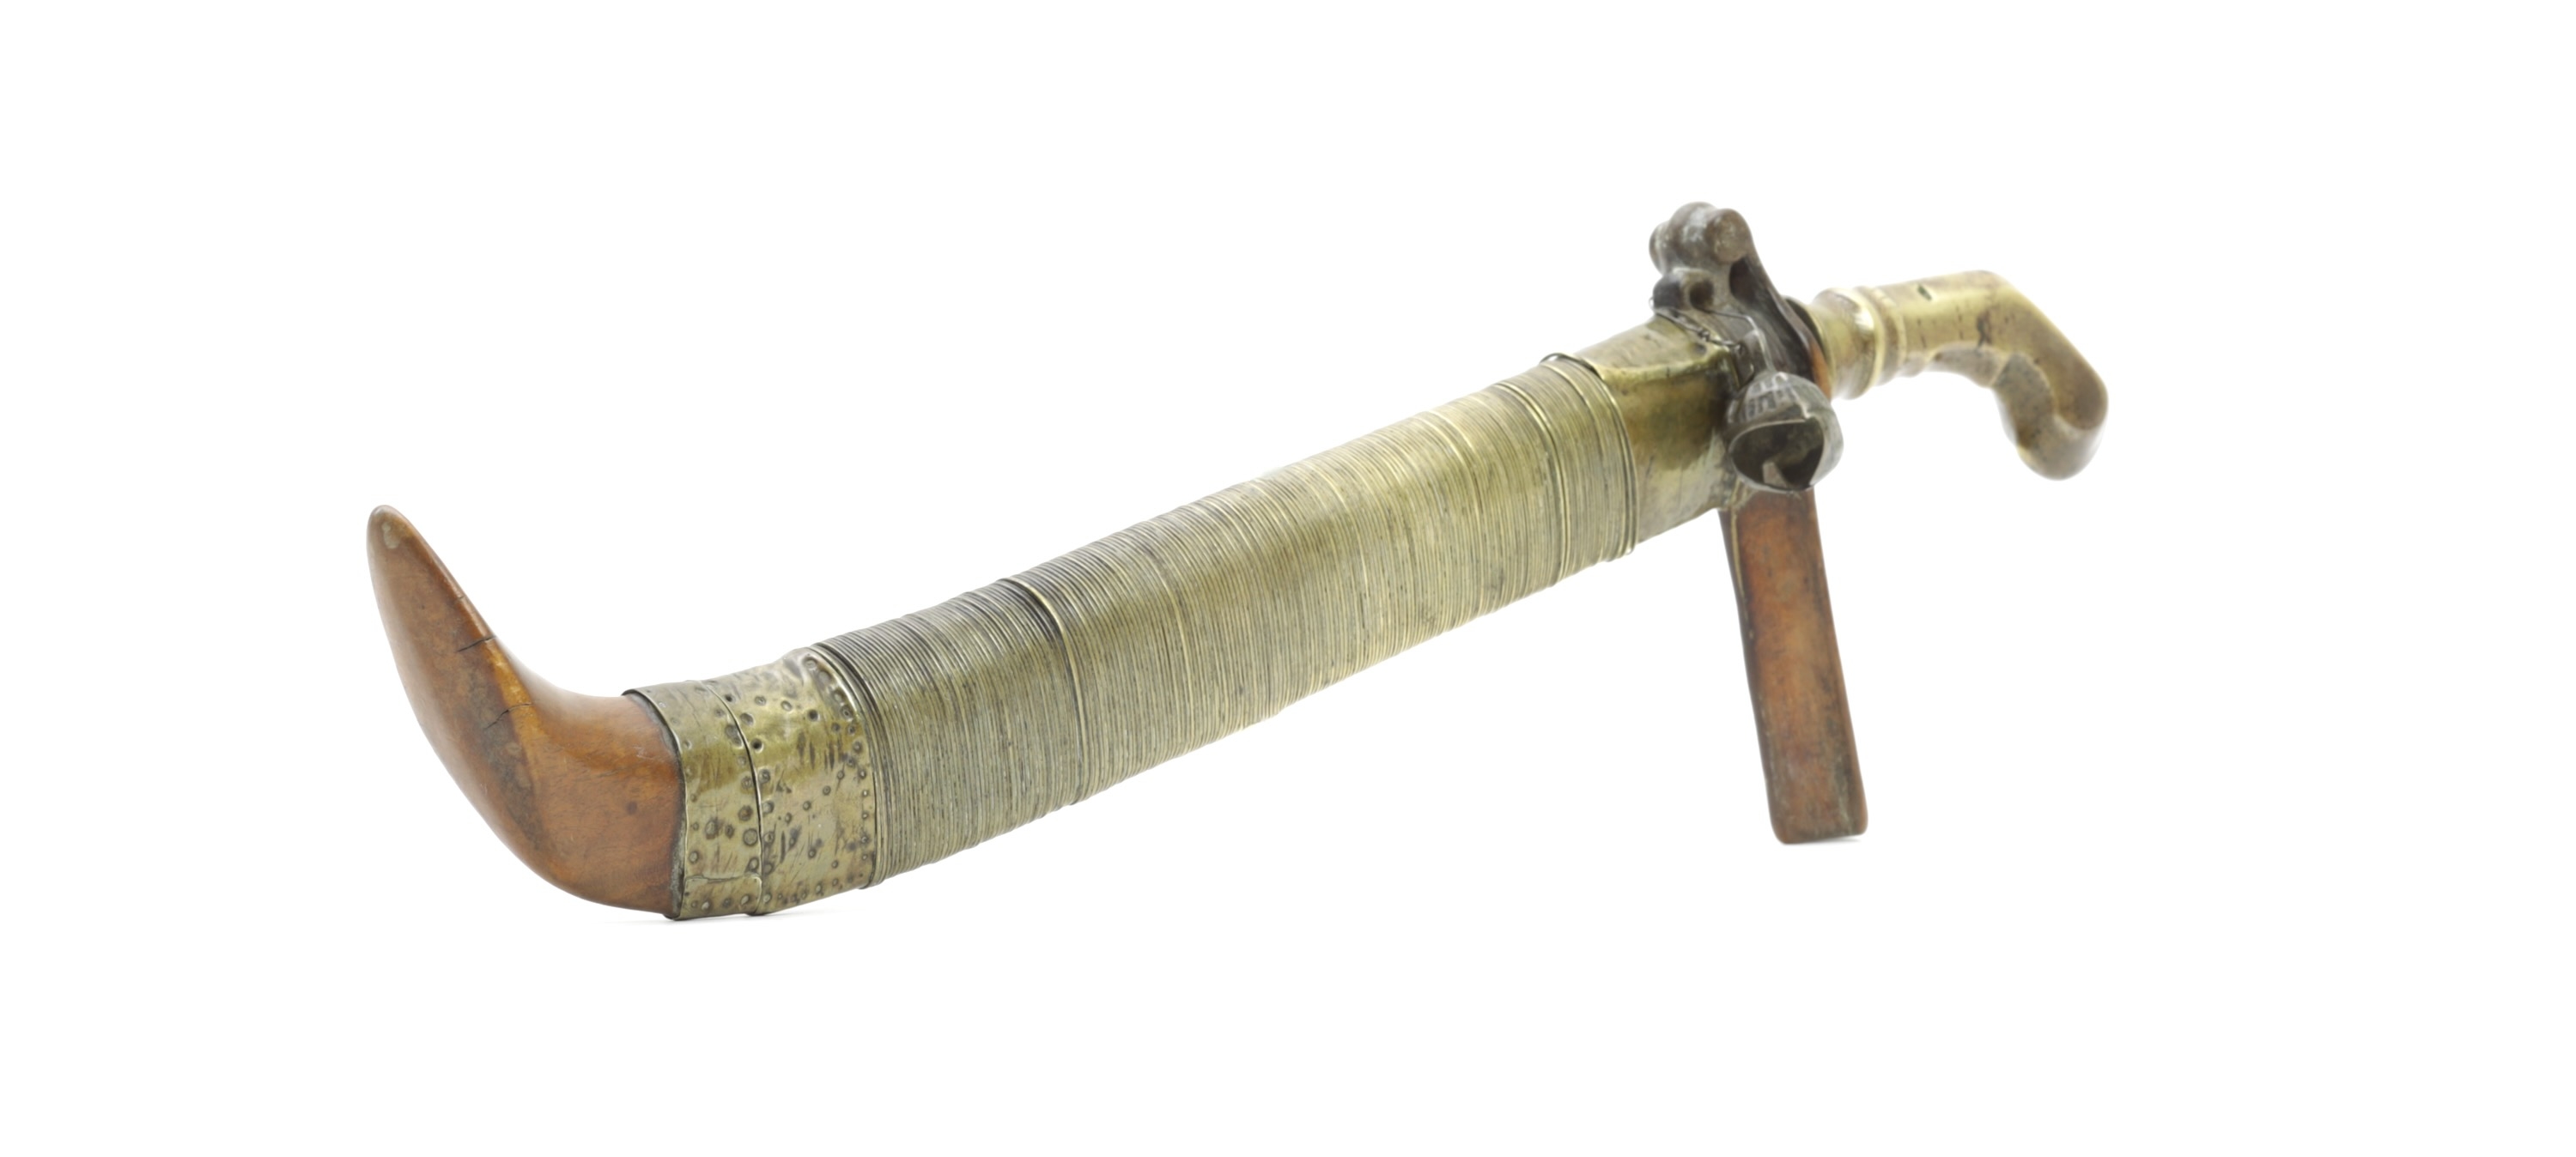 Si euli knife from North Nias